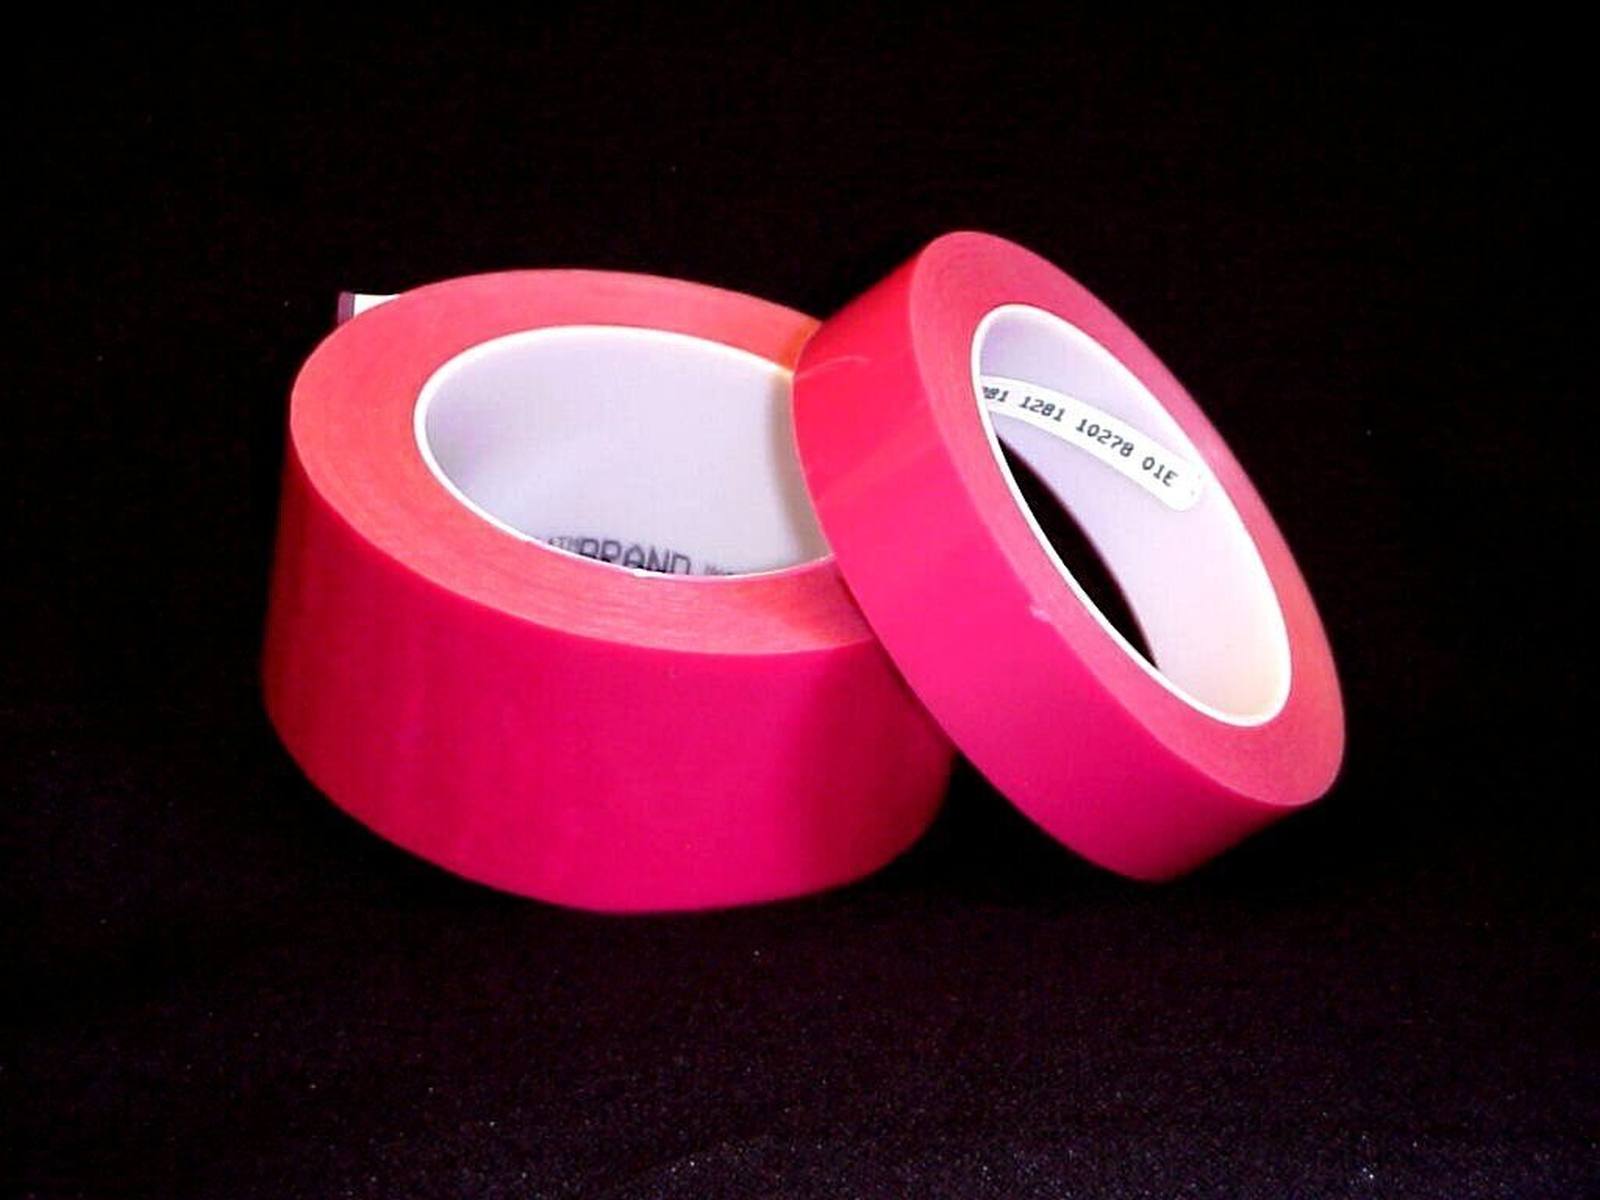 3M high temperature polyester adhesive tape 1280, red, 50.8 mm x 66 m, 91.4 µm